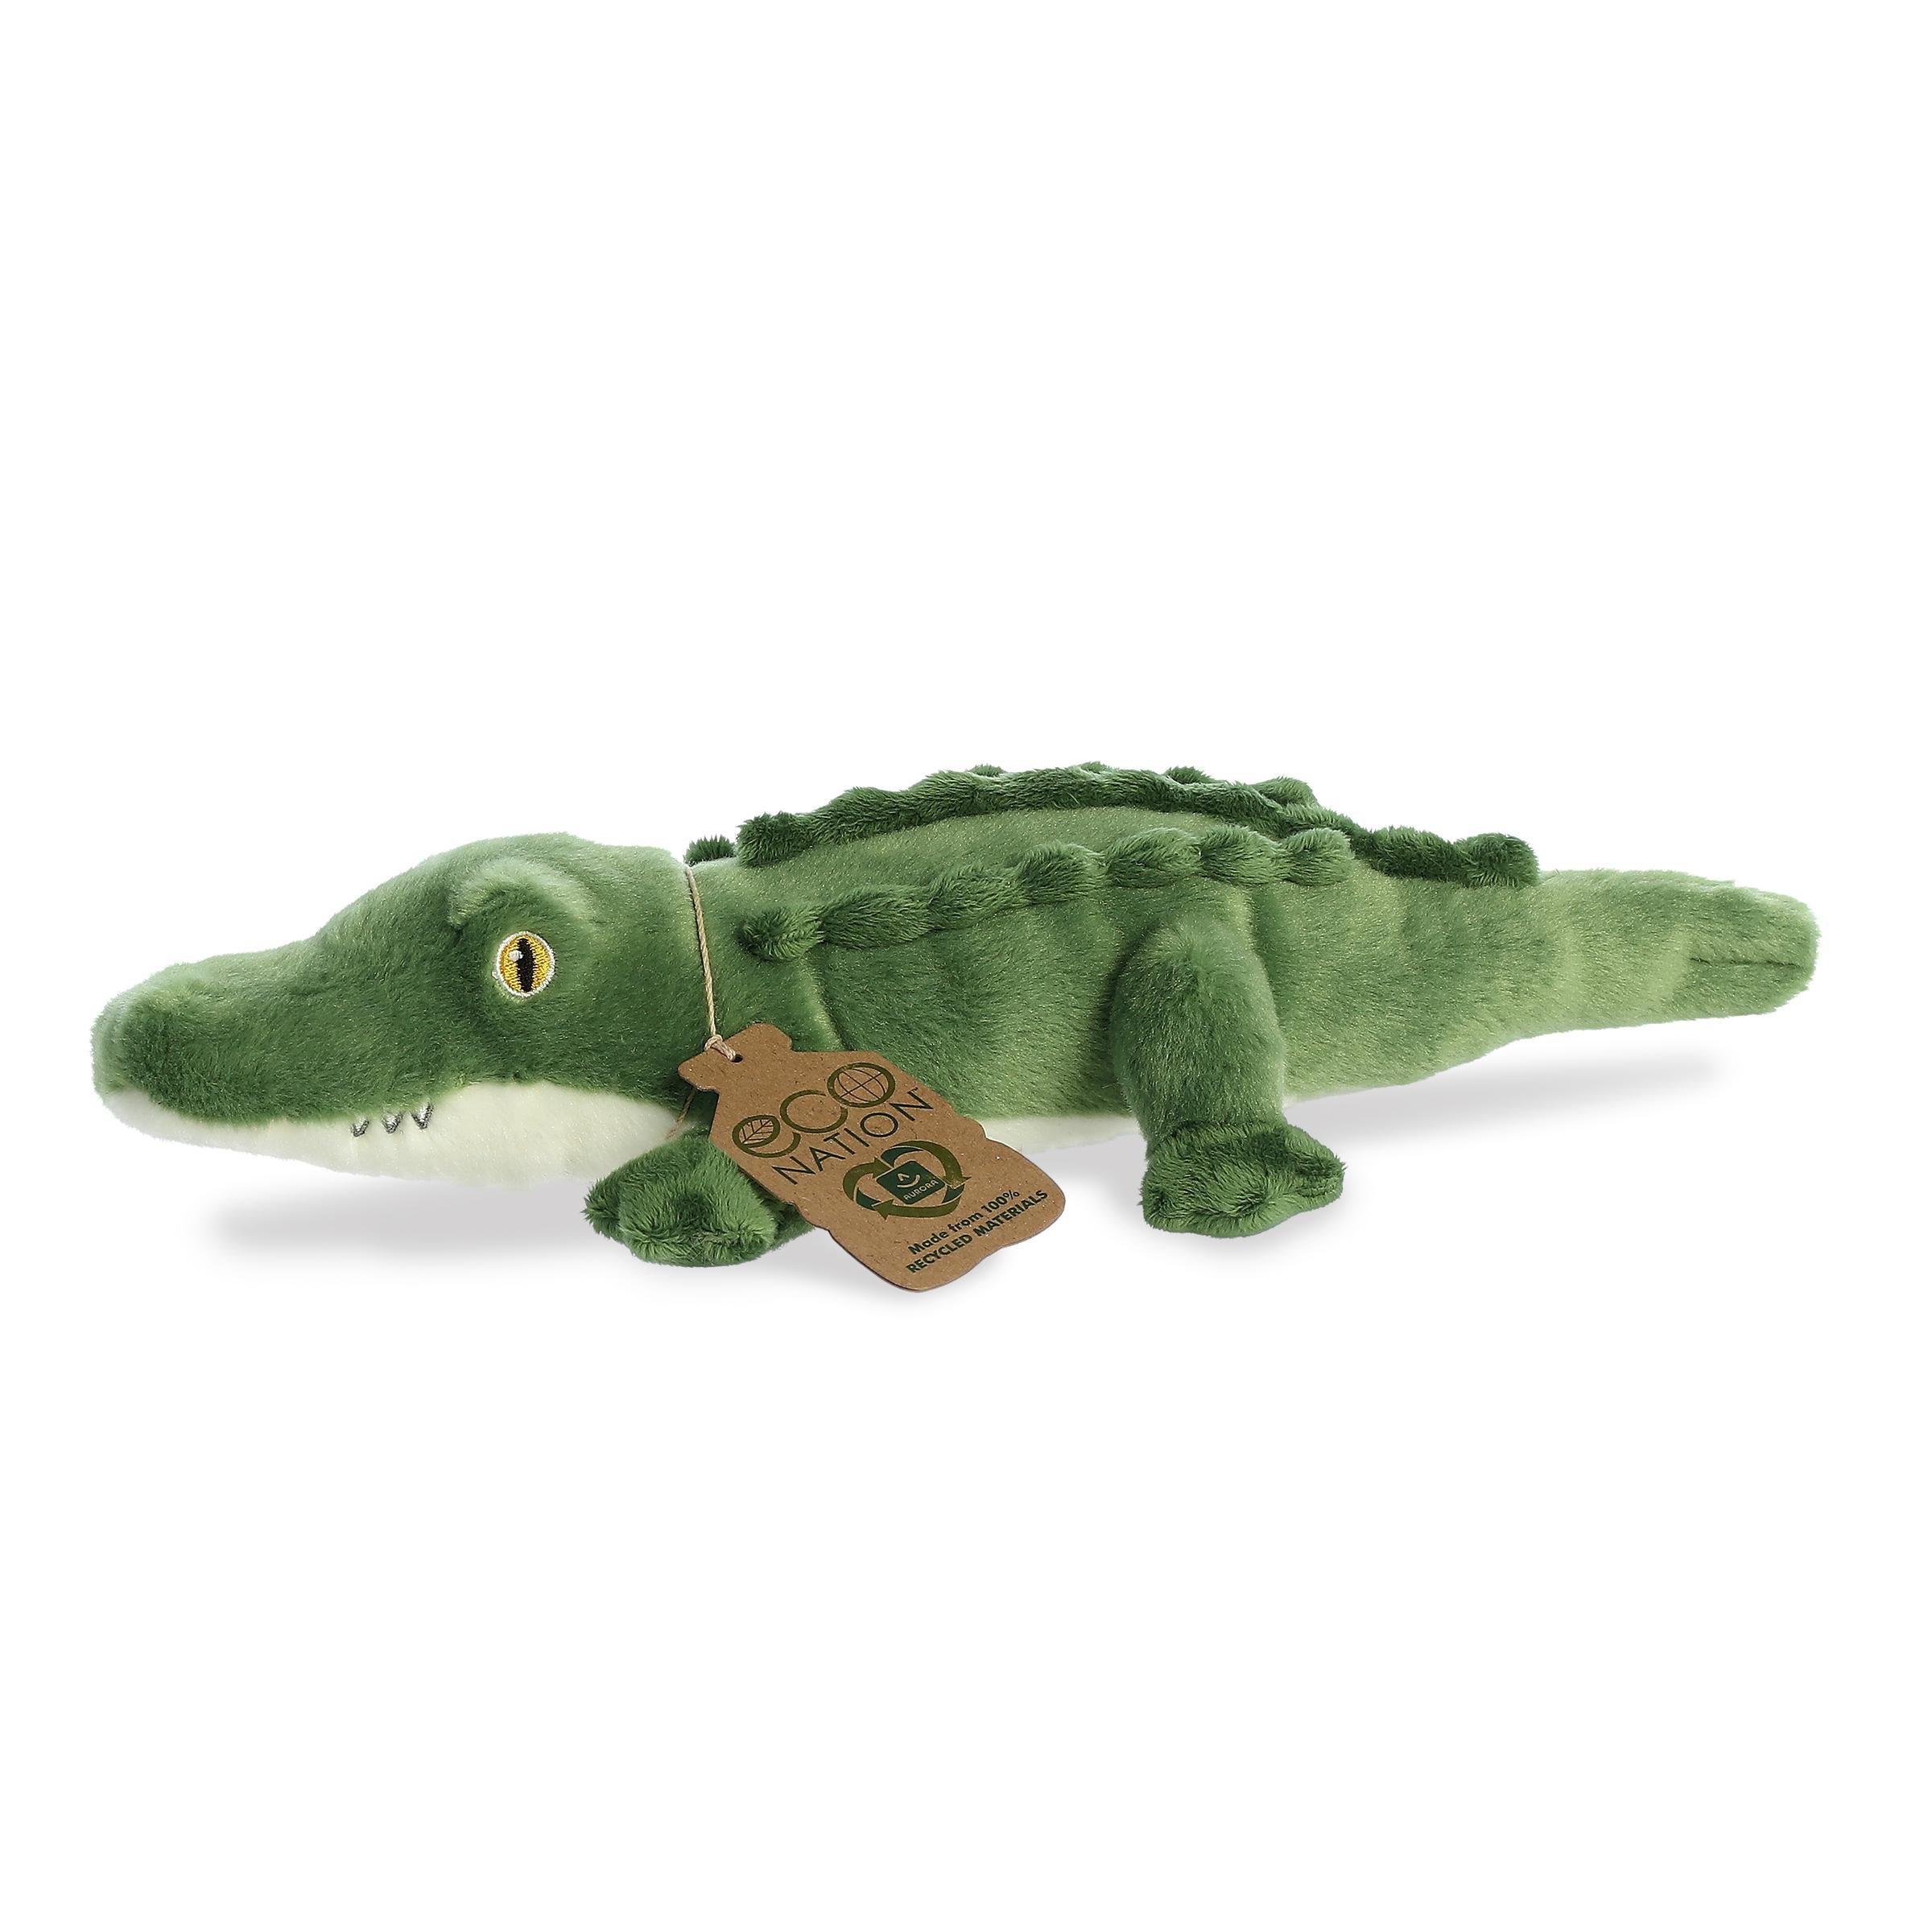 Irresistible alligator plush with a body made of shades of green, embroidered eyes, and an eco-nation tag